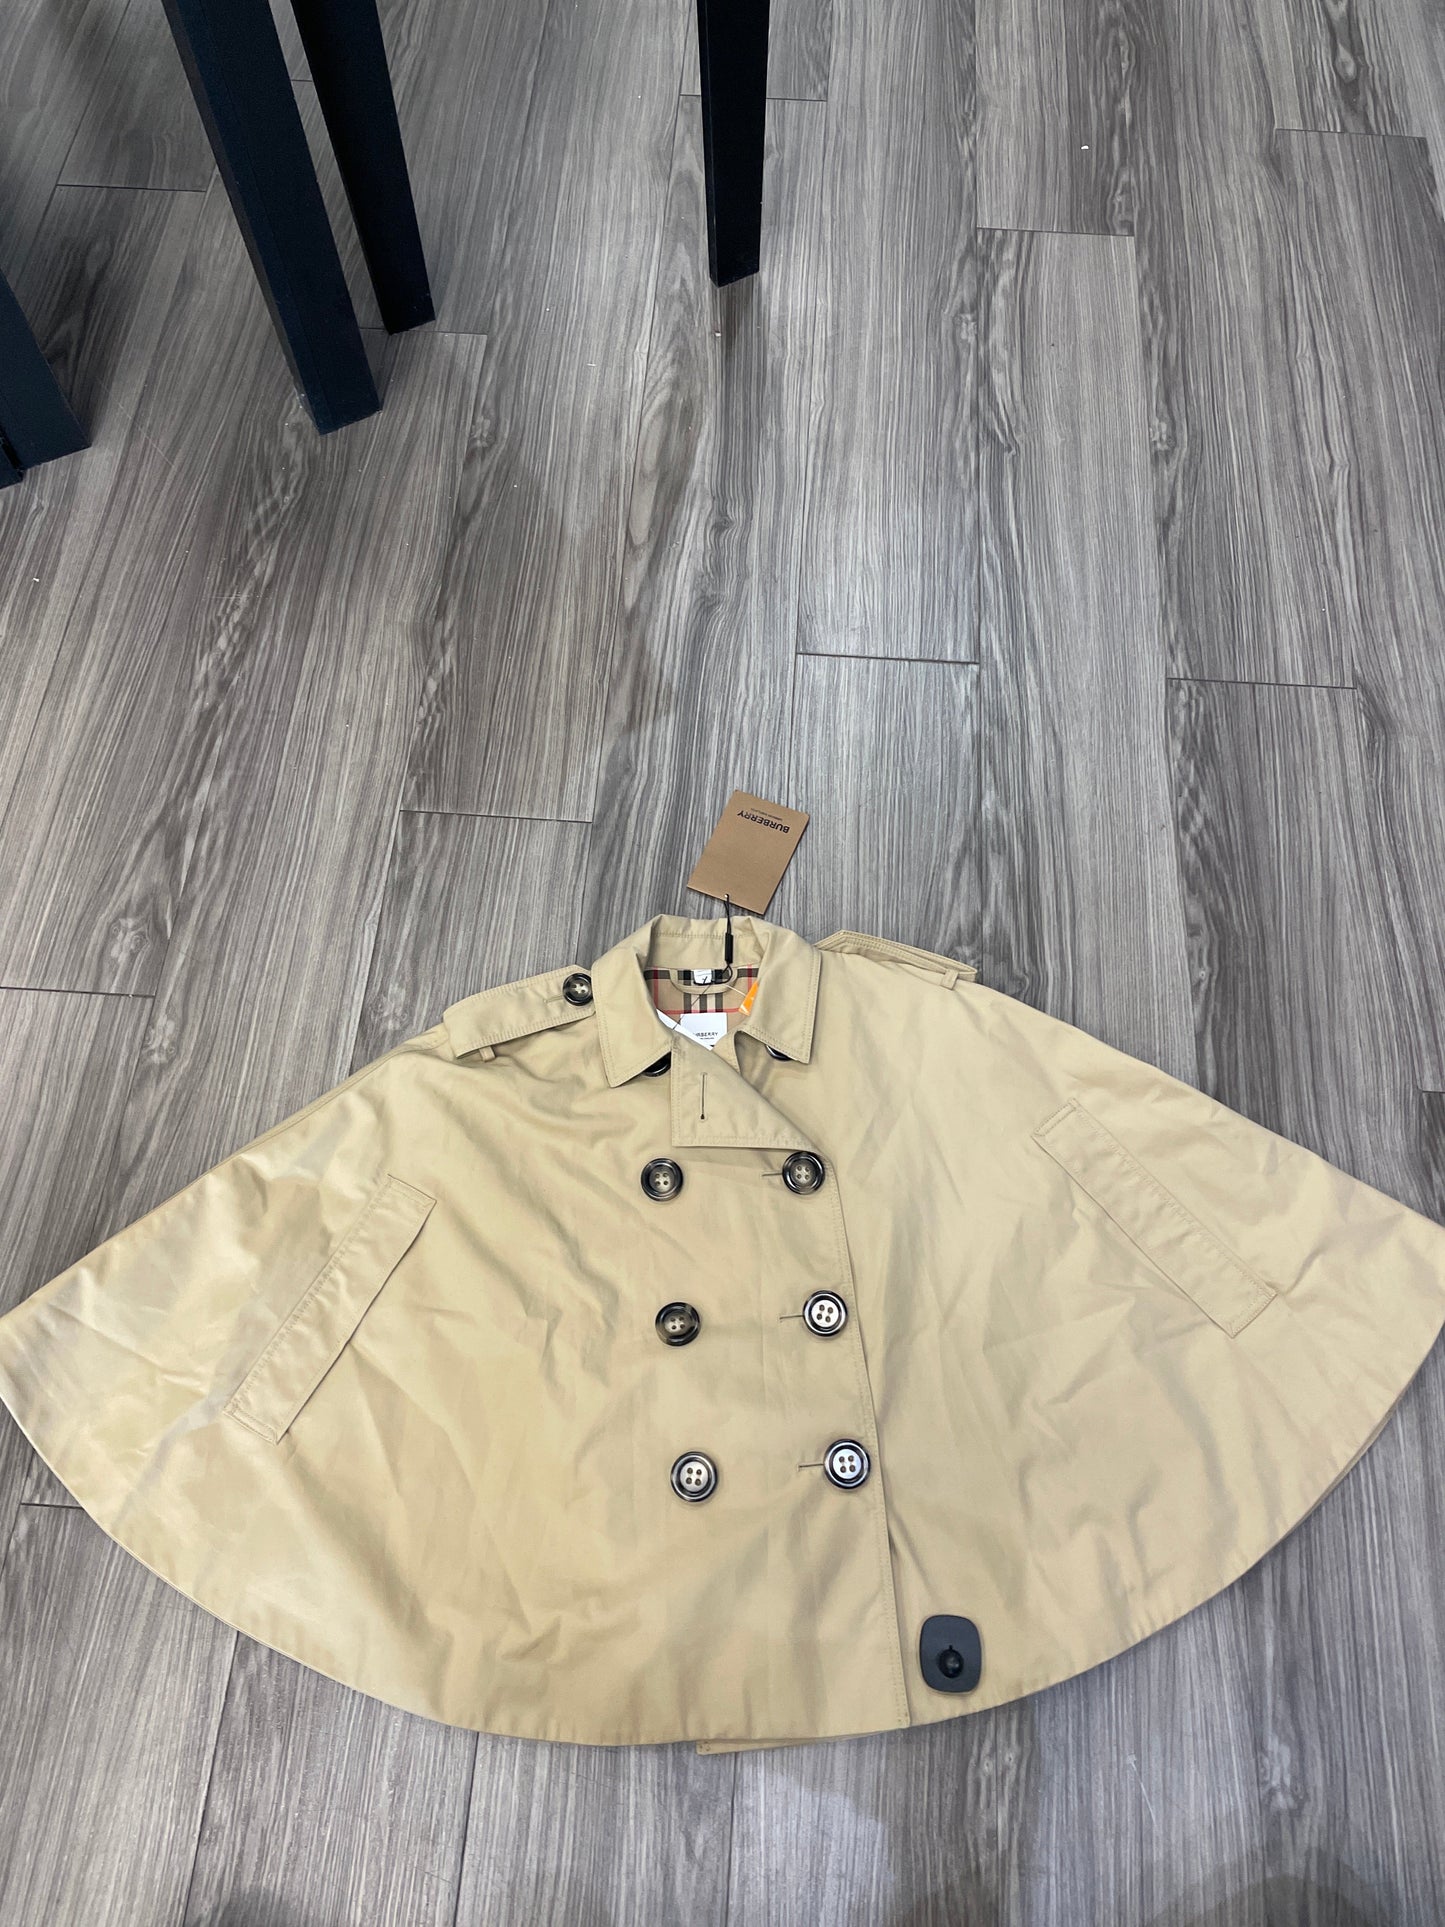 Coat Designer By Burberry  Size: M